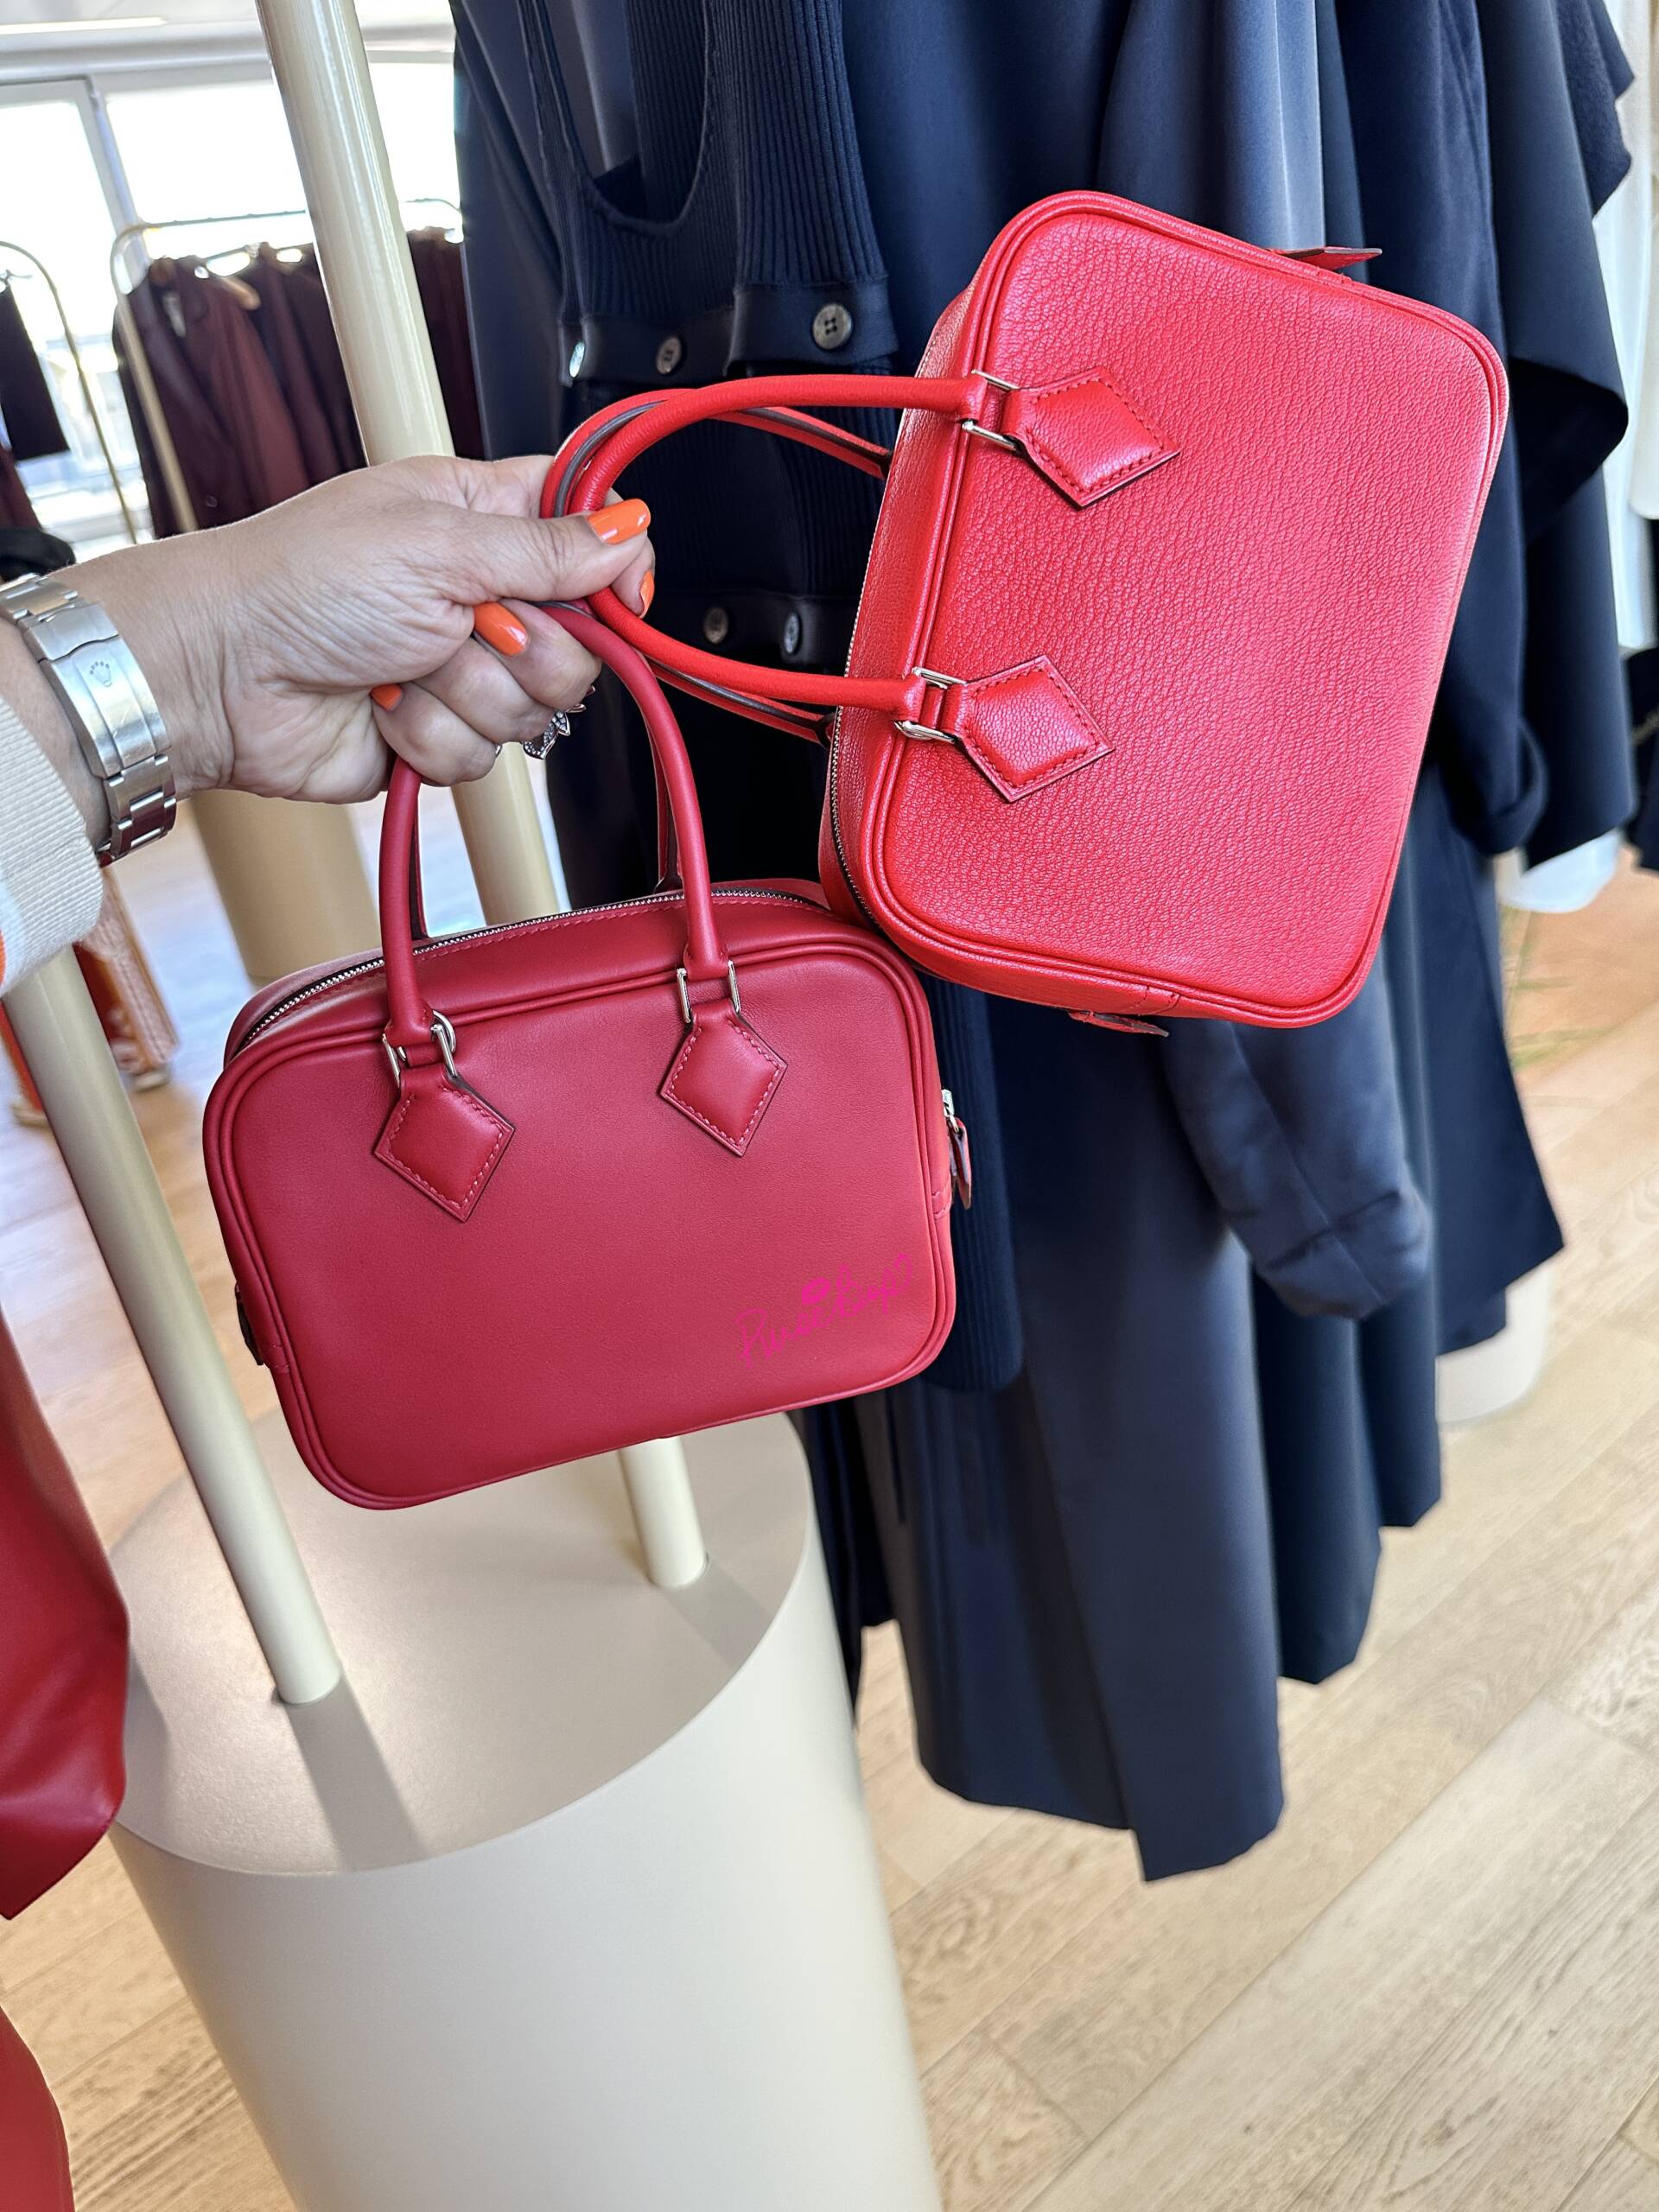 The Many Shades of Hermès Pink, Handbags and Accessories